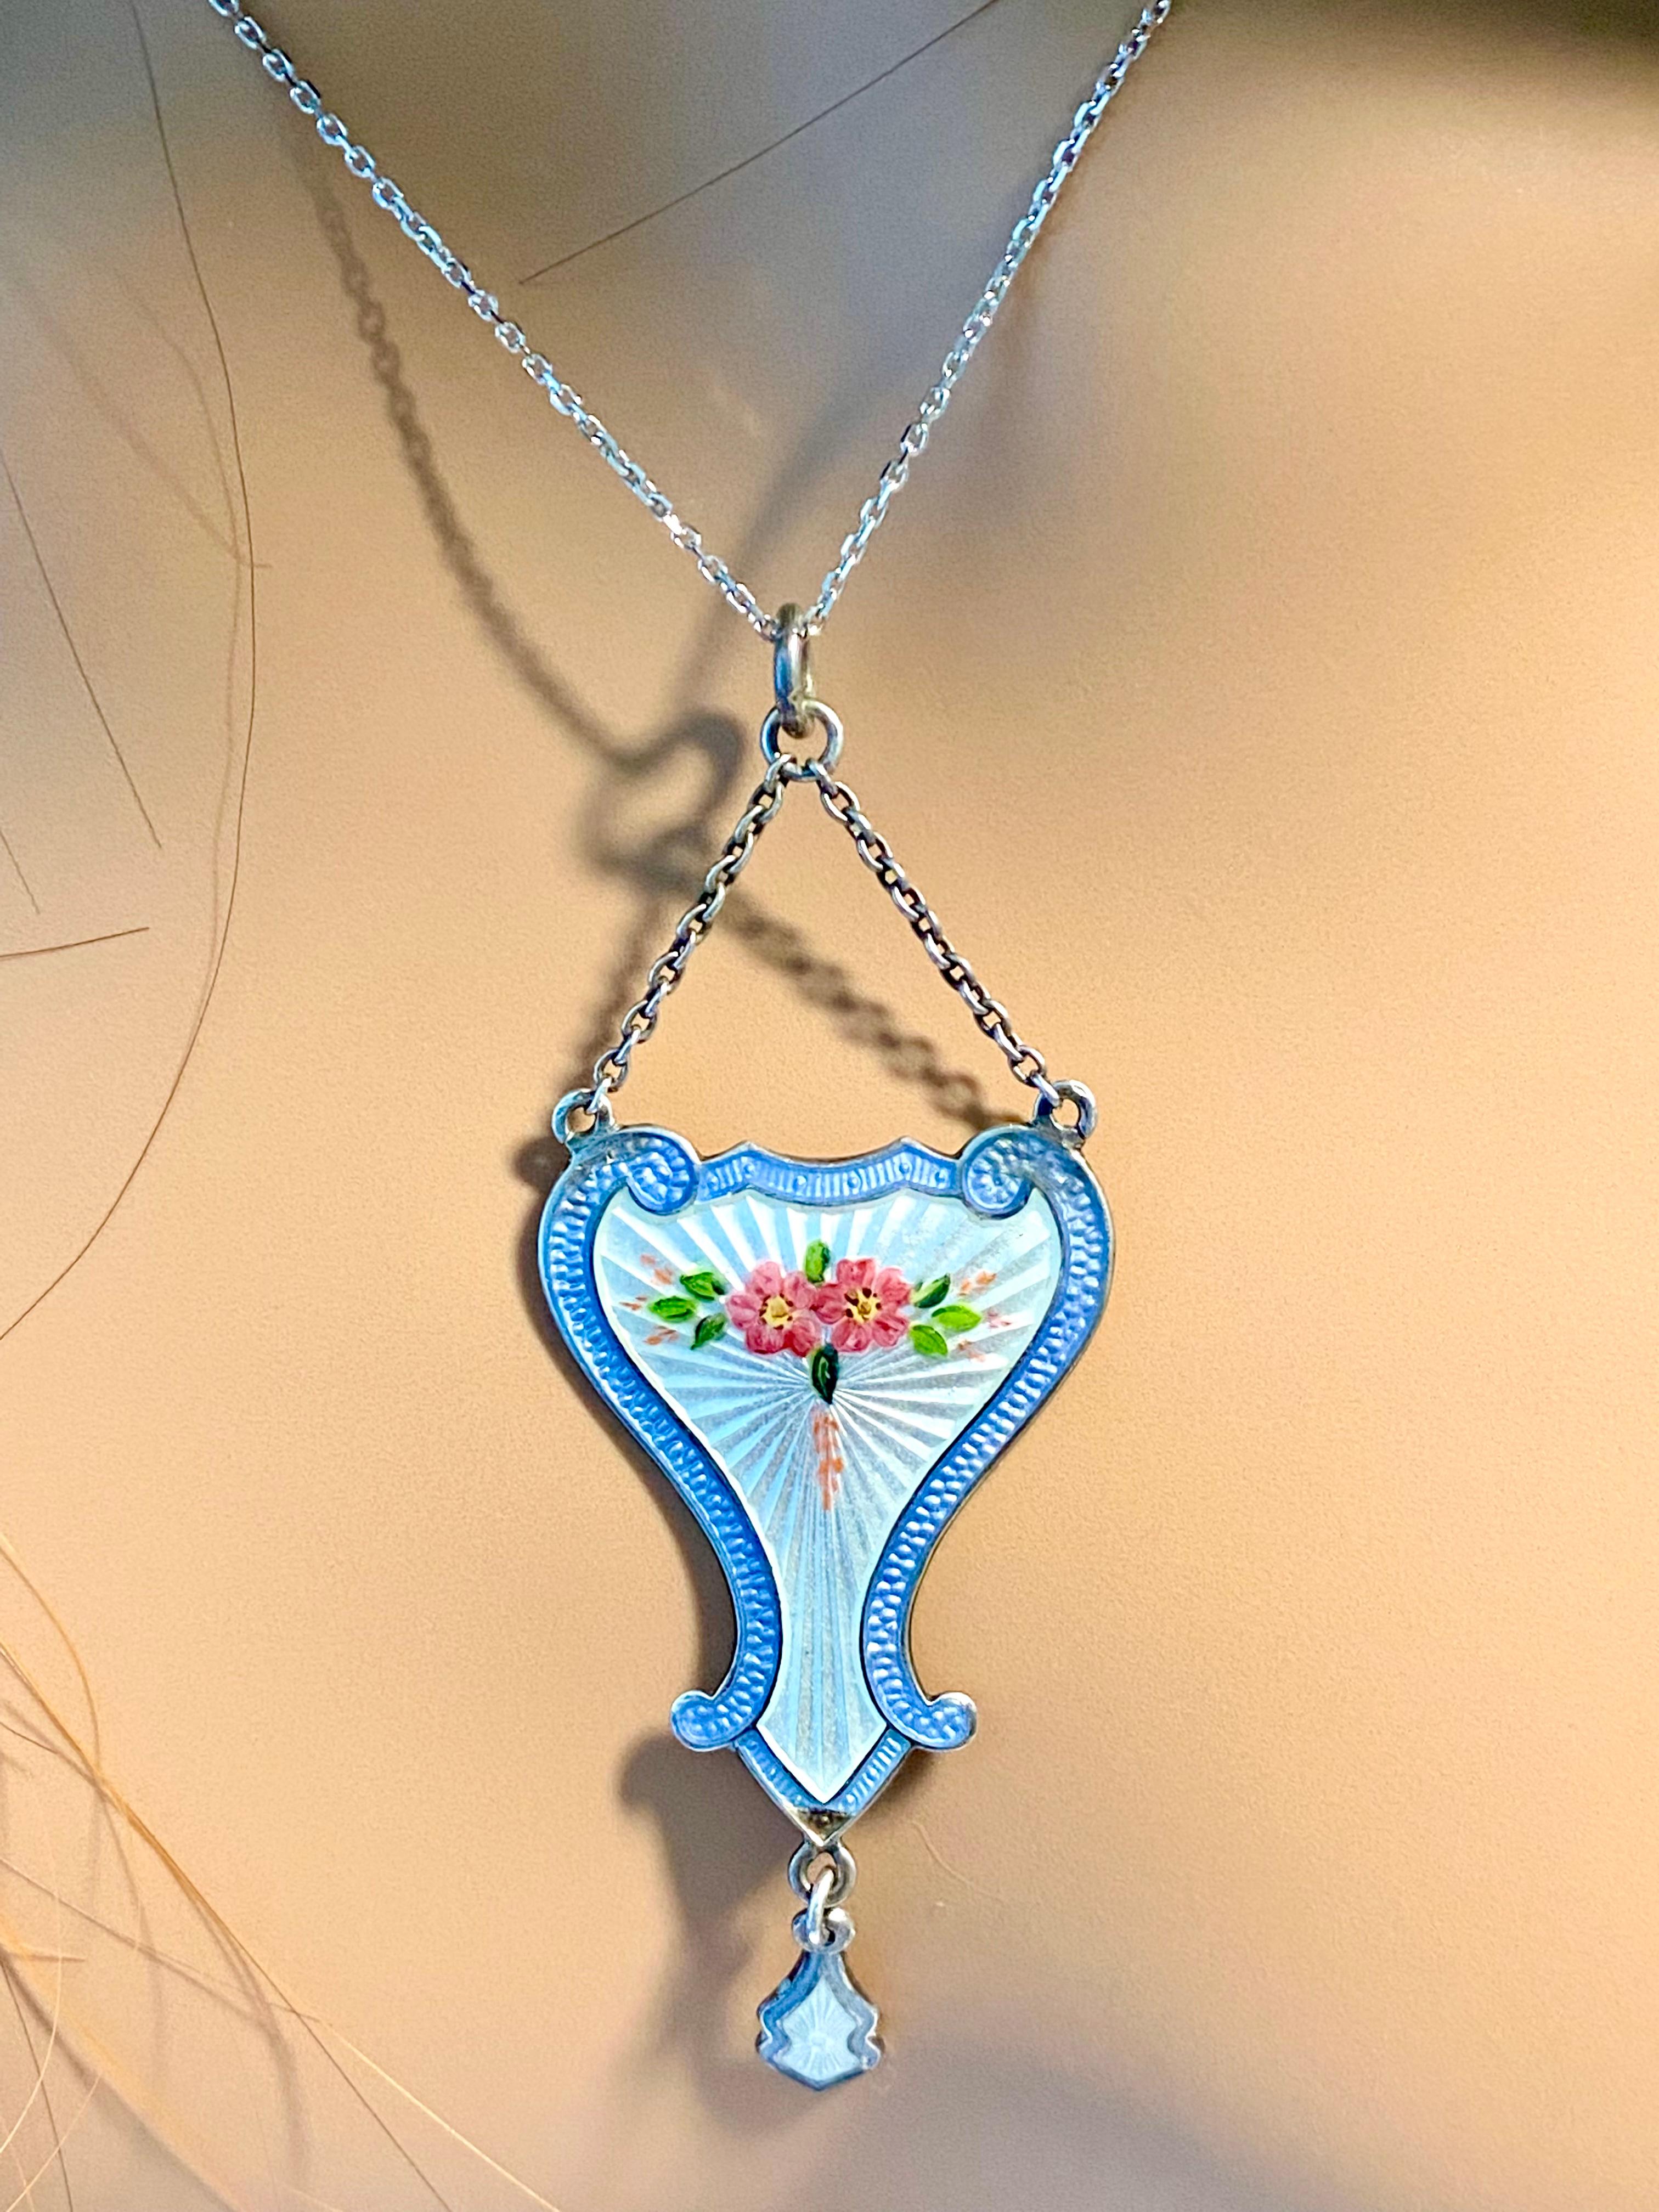 Antique Birmingham 1910 Art Nouveau Silver Guilloche Enamel Pendant - Exquisite Vintage Jewelry
Unlock the charm of a bygone era with this stunning Antique Birmingham 1910 Art Nouveau Silver Guilloche Enamel Pendant. Meticulously crafted, this